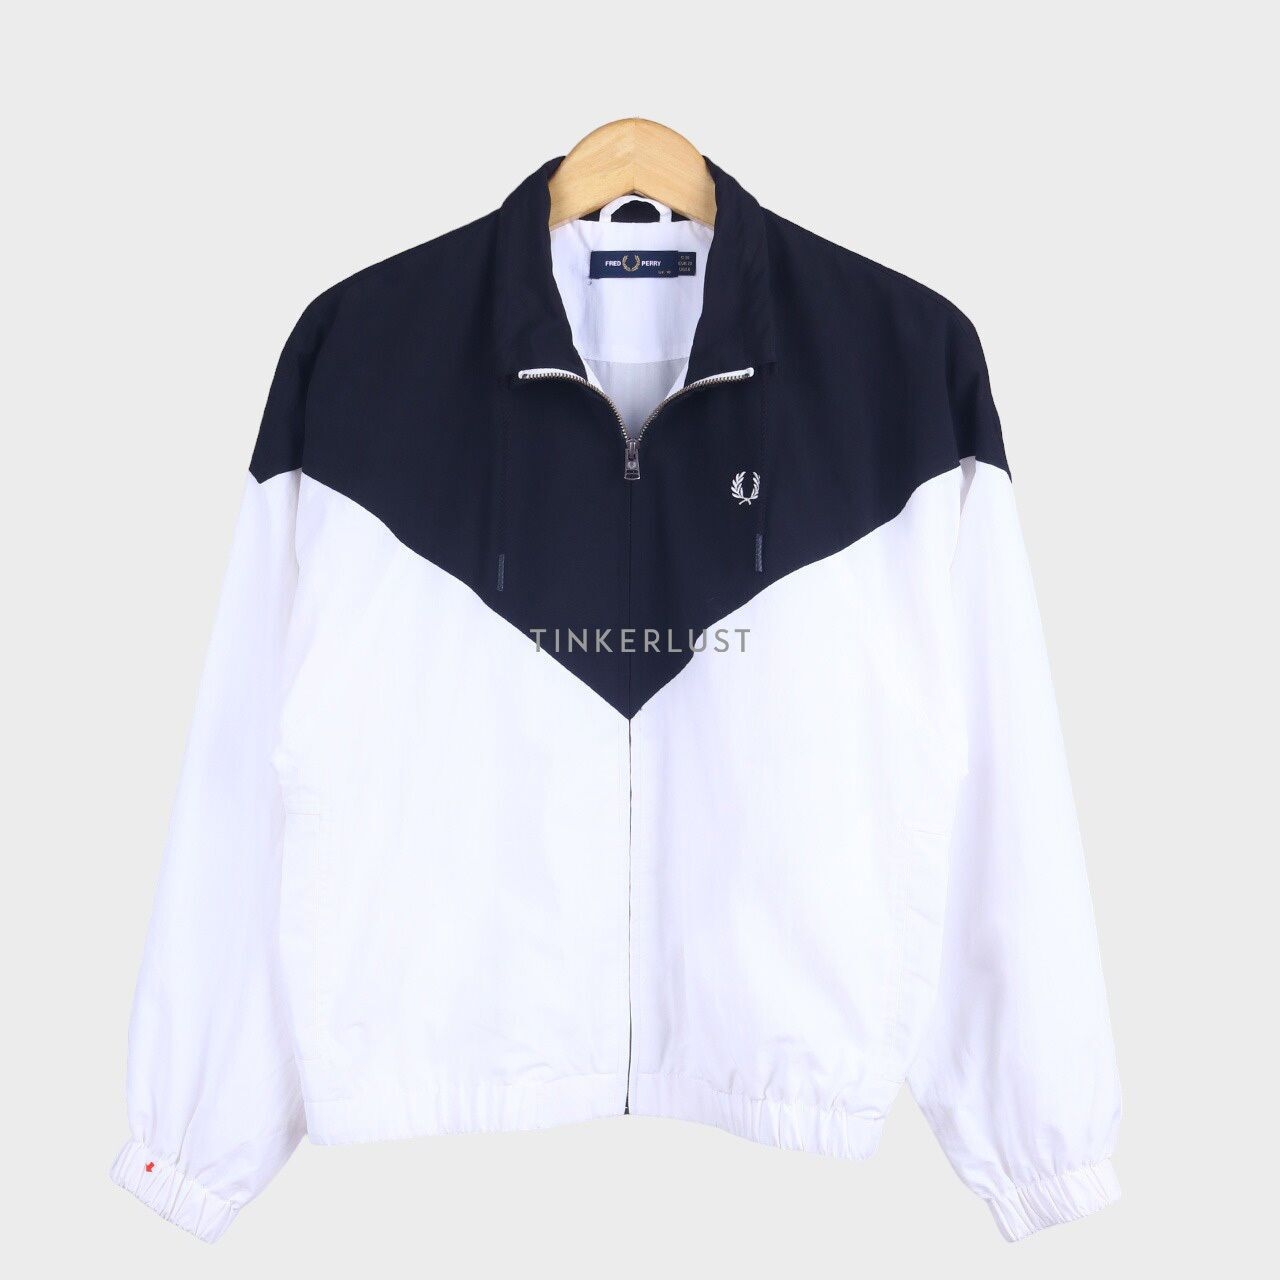 Fred Perry Black & White Jaket